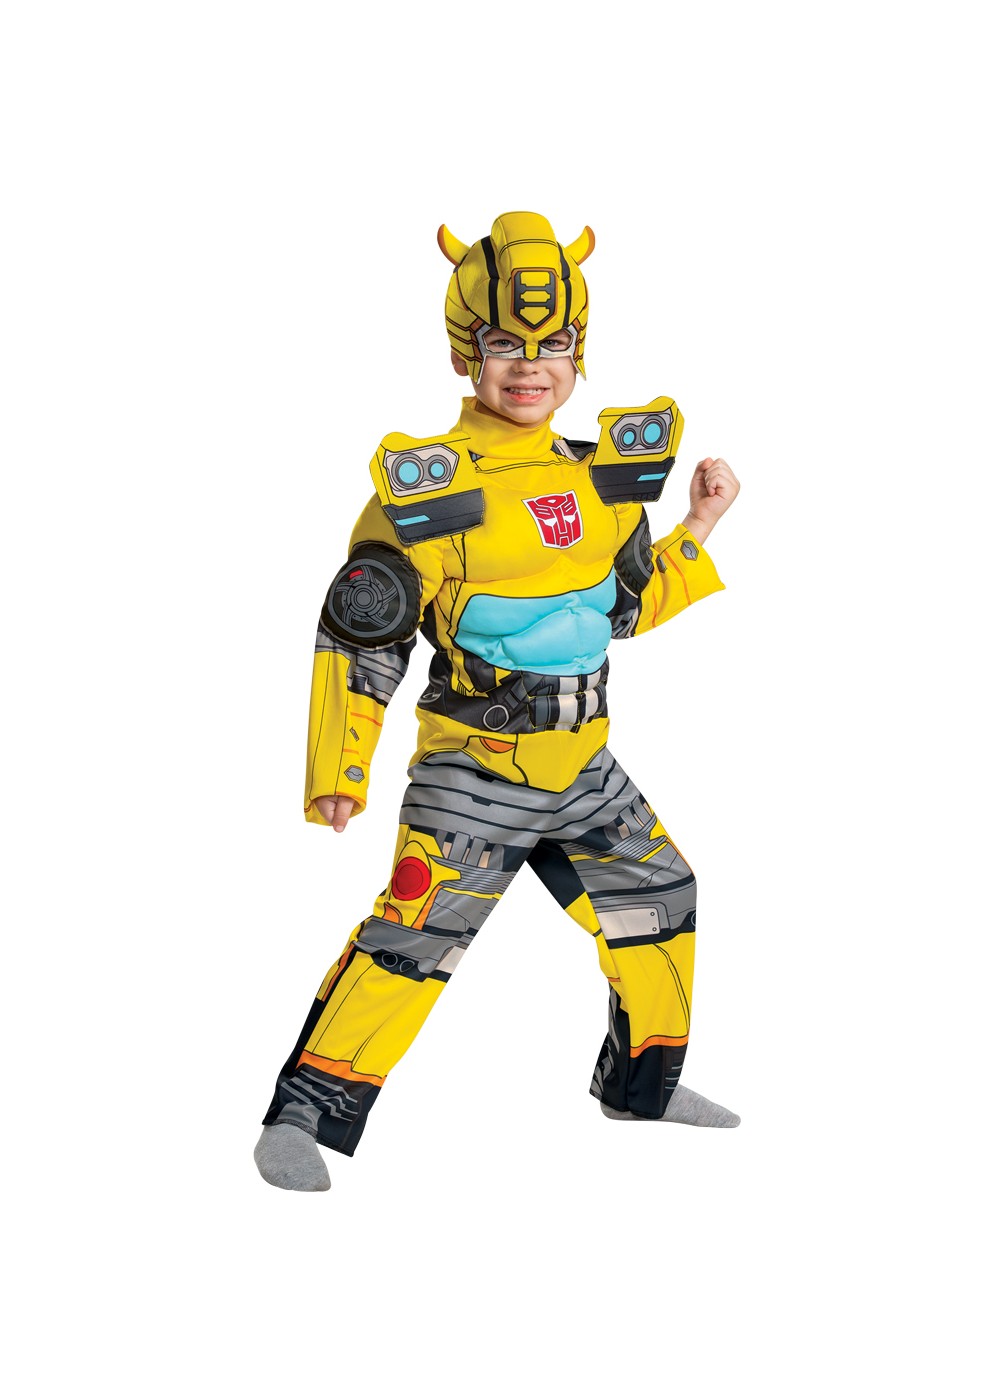 Boys Bumblebee Muscle Toddler Costume